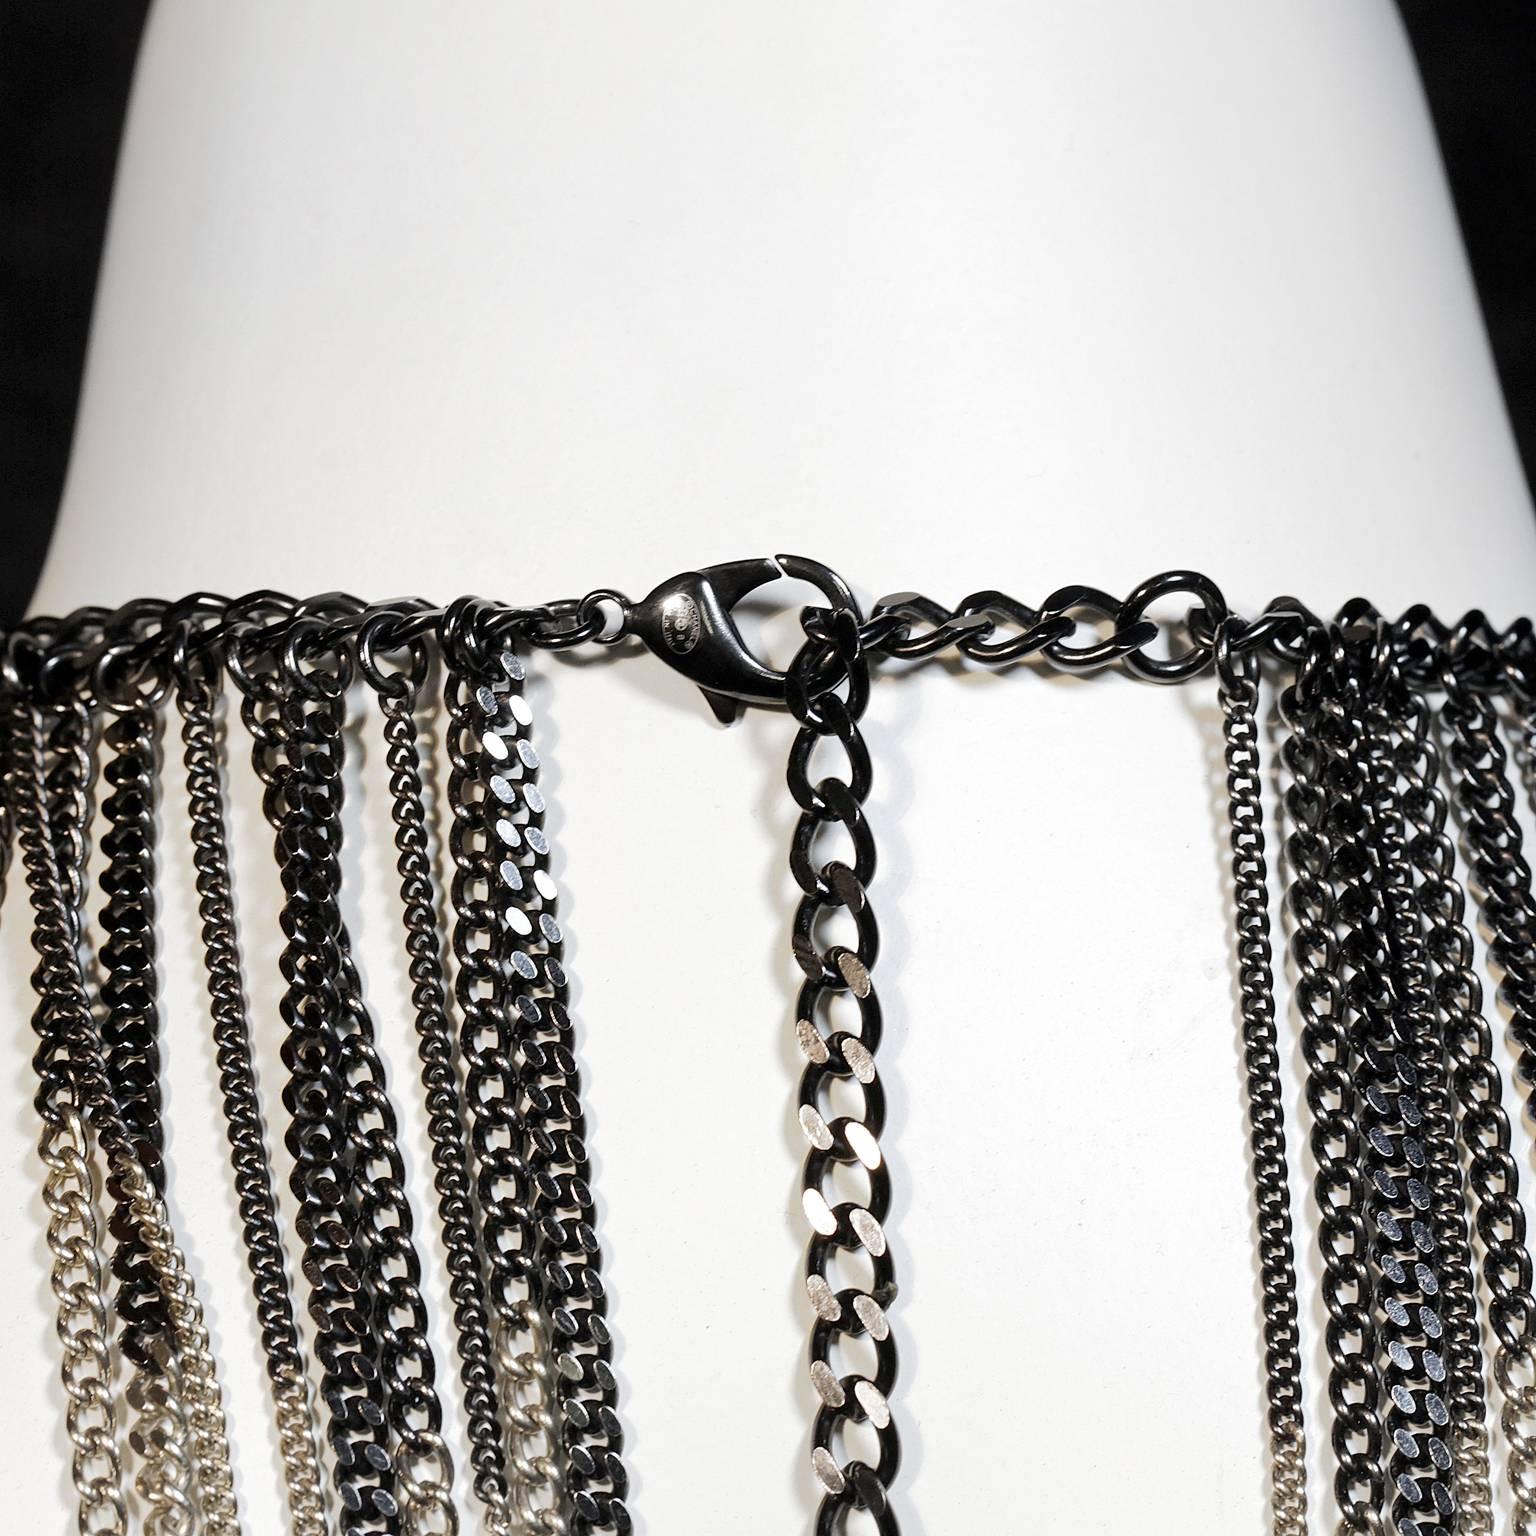 Women's Chanel Ruthenium and Gold Dripping Chain Bib Statement Necklace